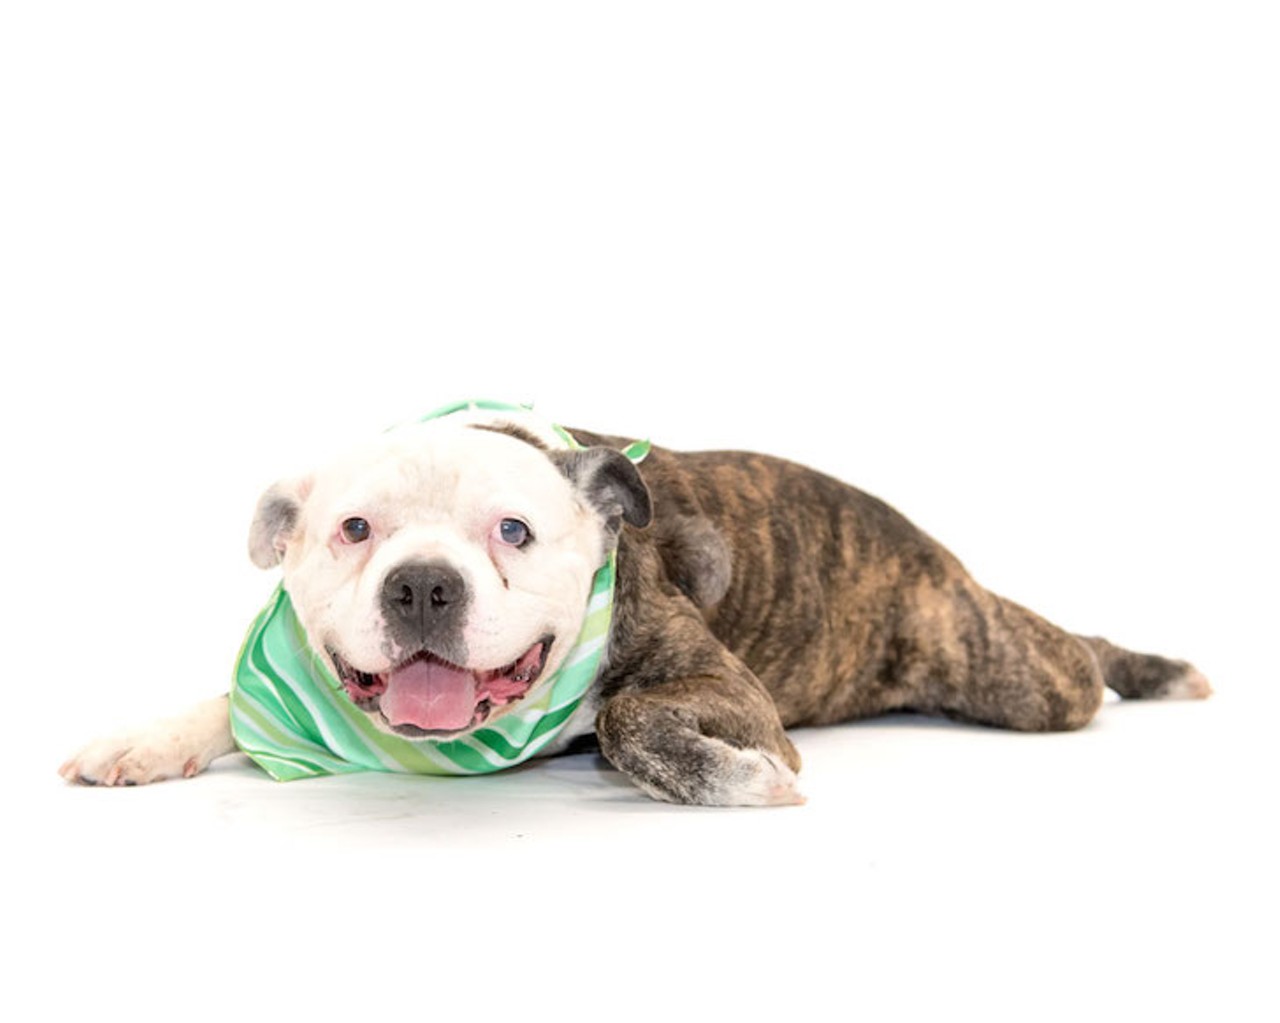 9 adoptable dogs hoping to be lucky this St. Patrick's Day